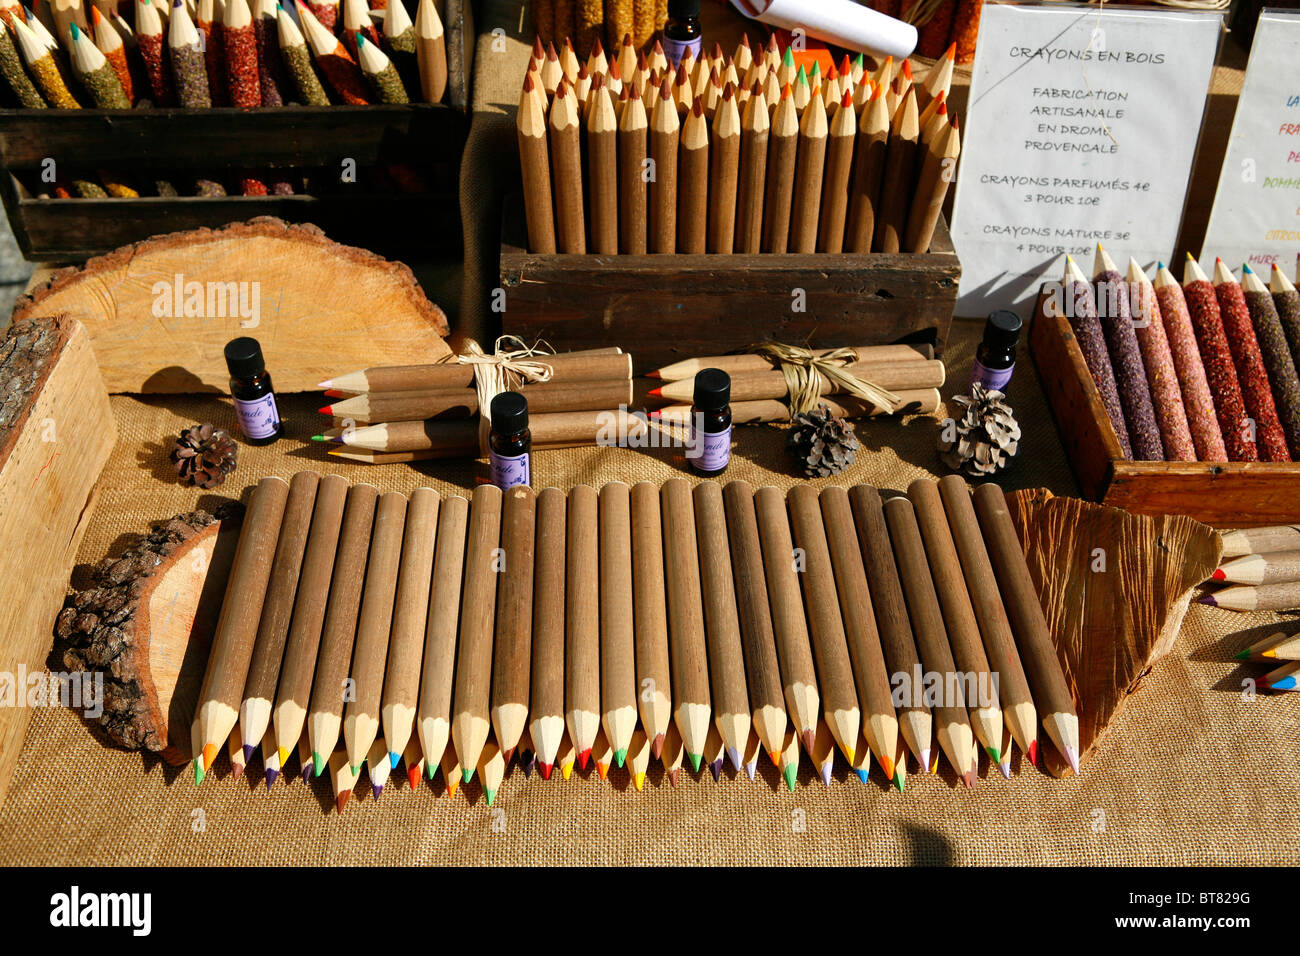 Pencils on a market in the Provence, France, Europe Stock Photo